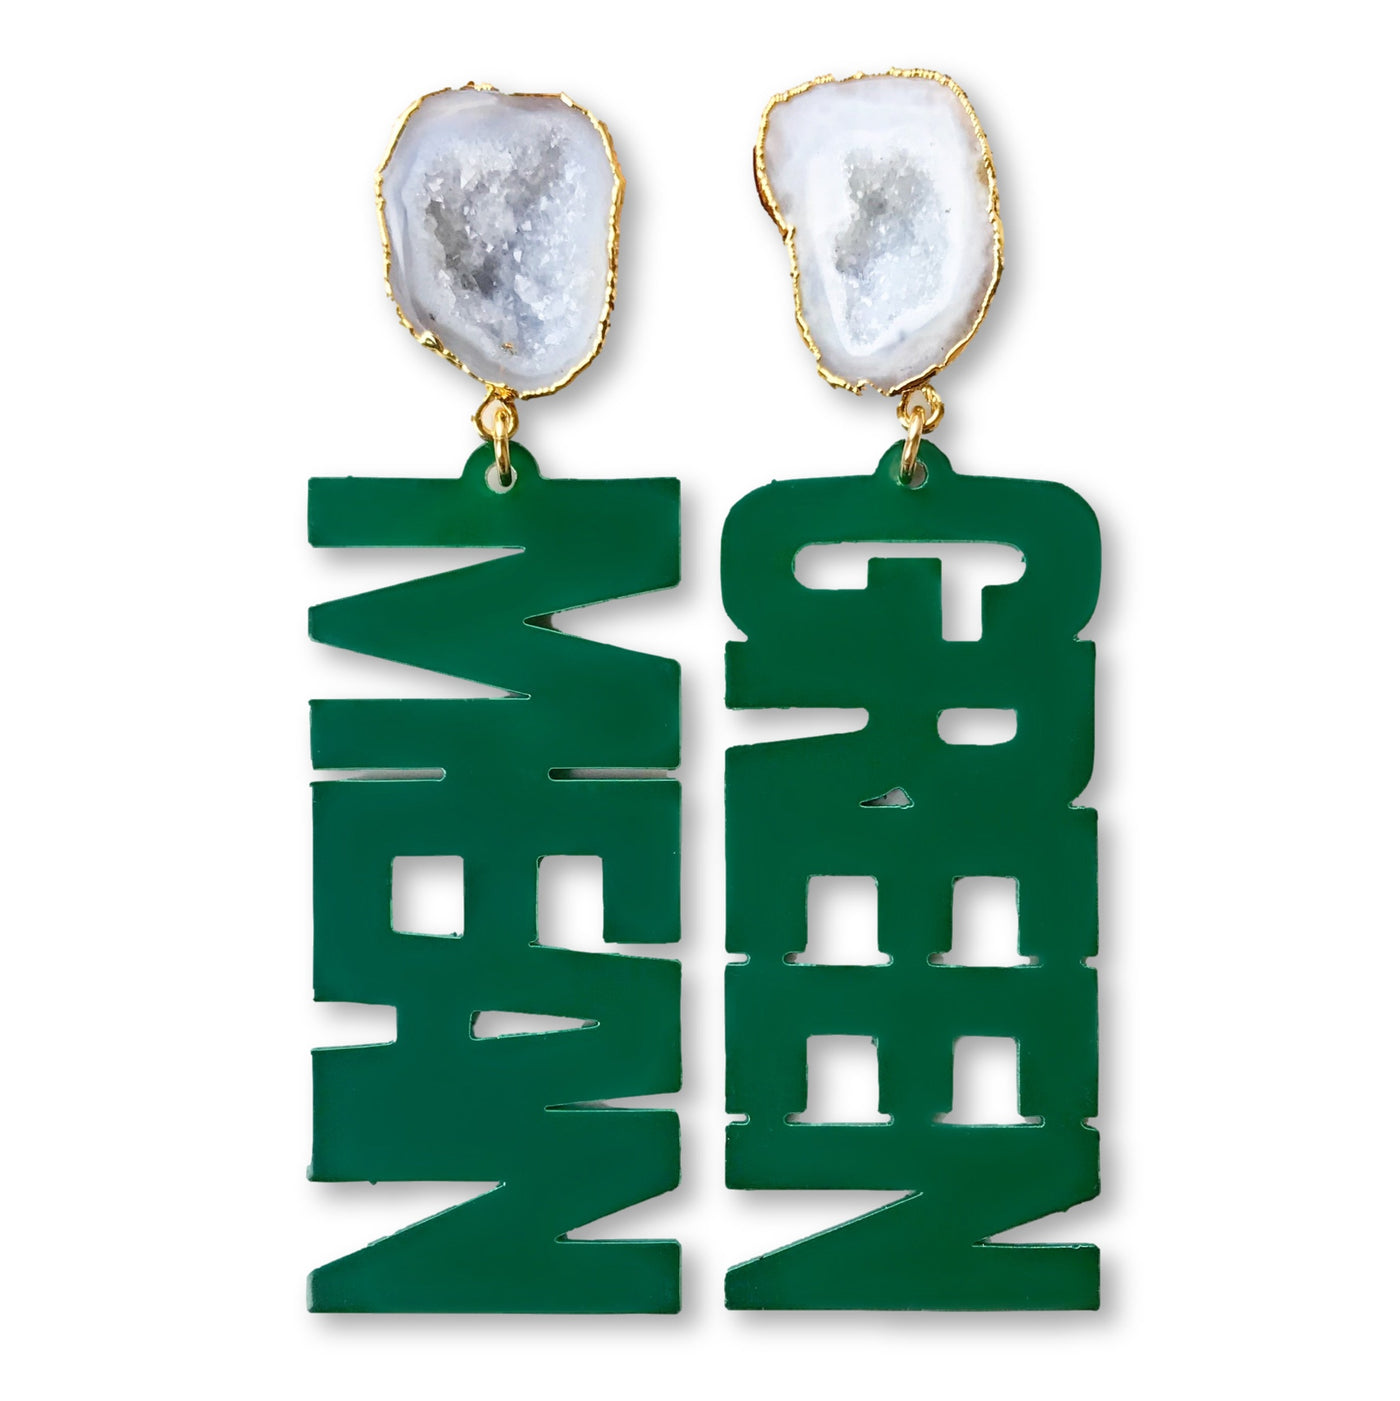 UNT Green "MEAN GREEN" Earrings with White Geode